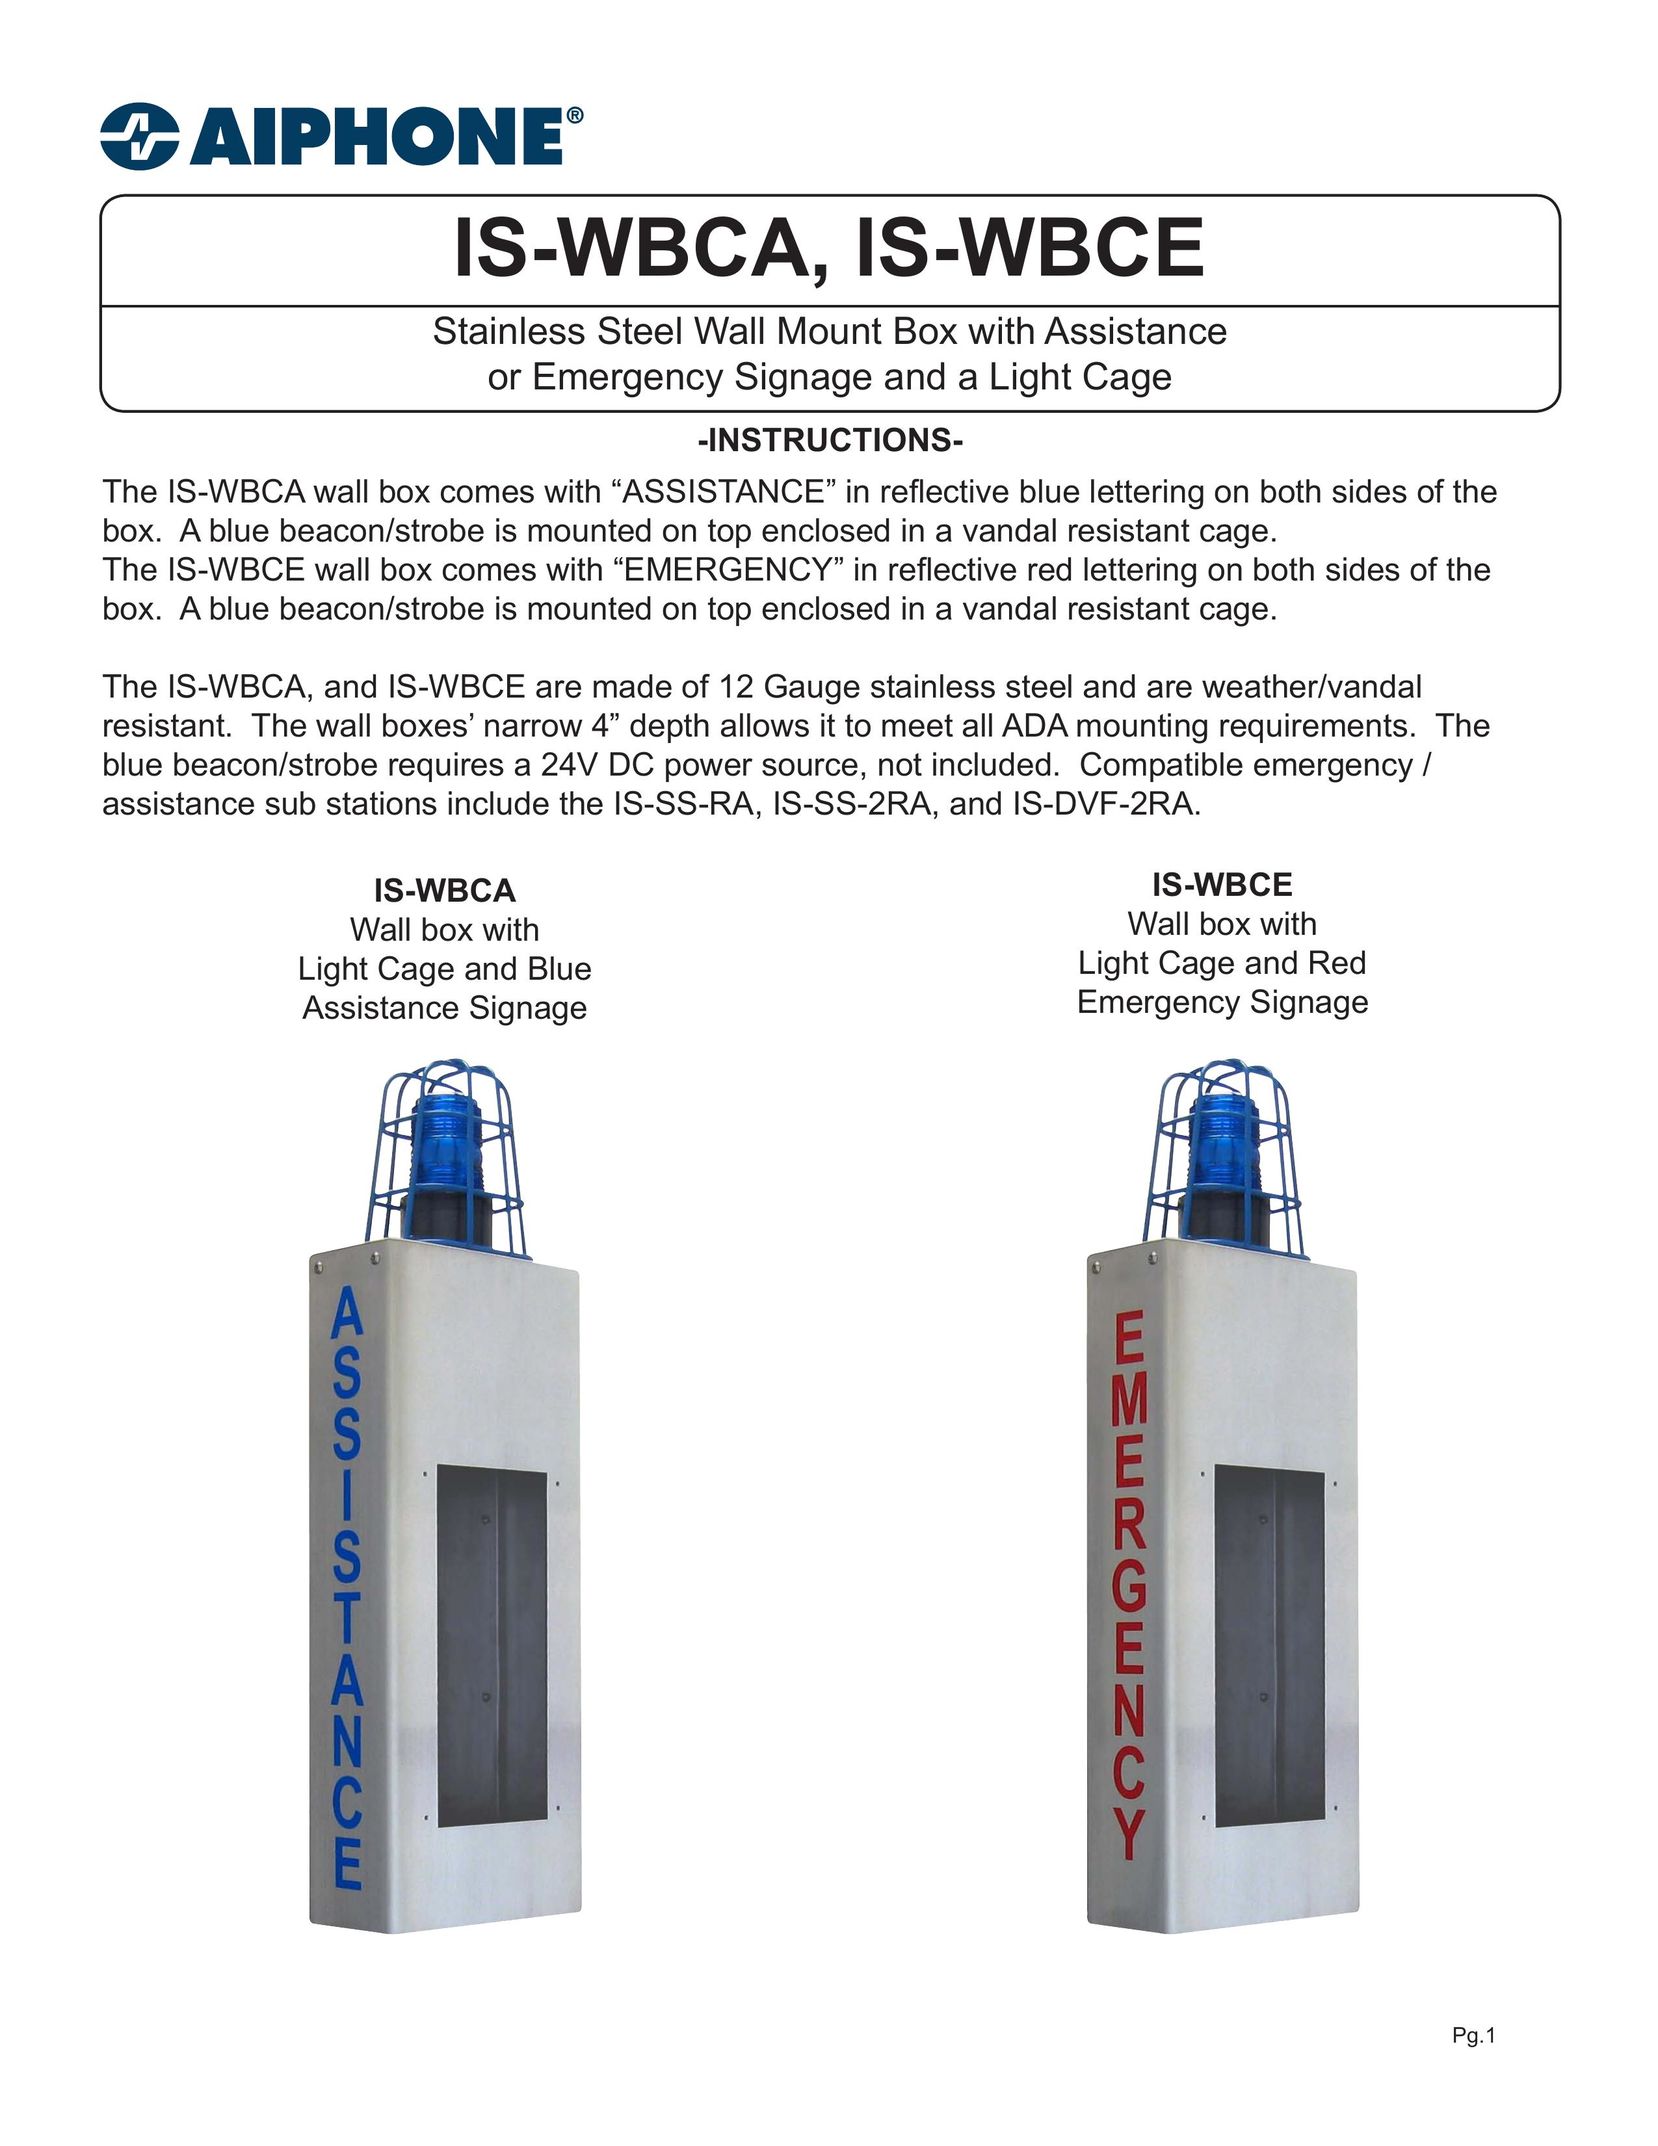 Aiphone IS-WBCA Stereo System User Manual